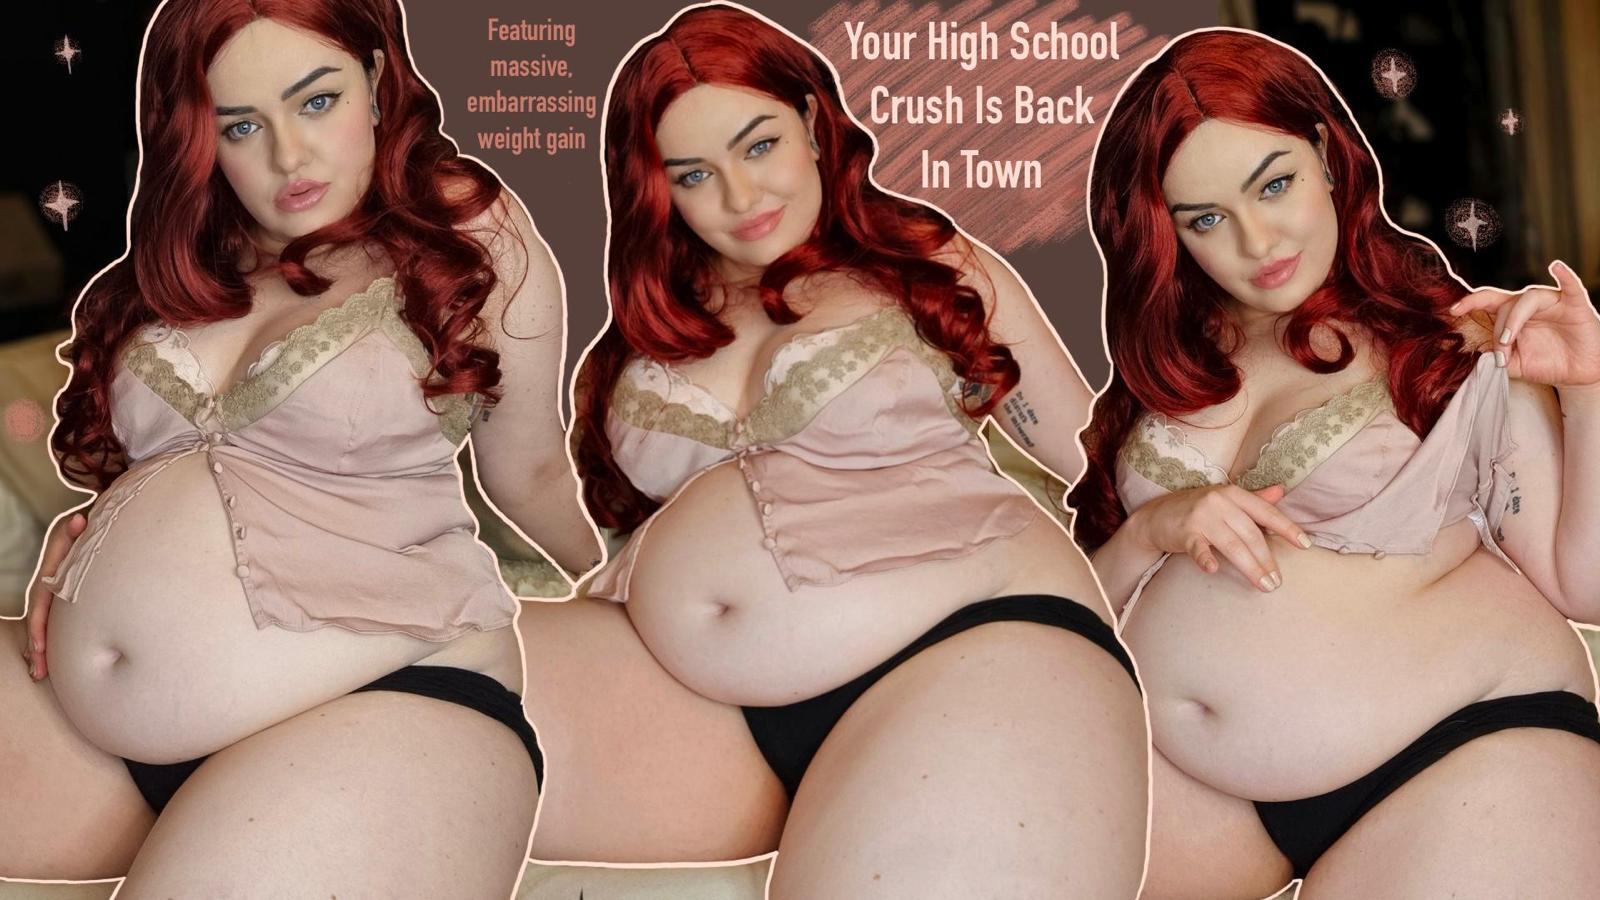 Your High School Crush Is Back In Town - Video Clips - Weight Gain - feeder/feedee photo